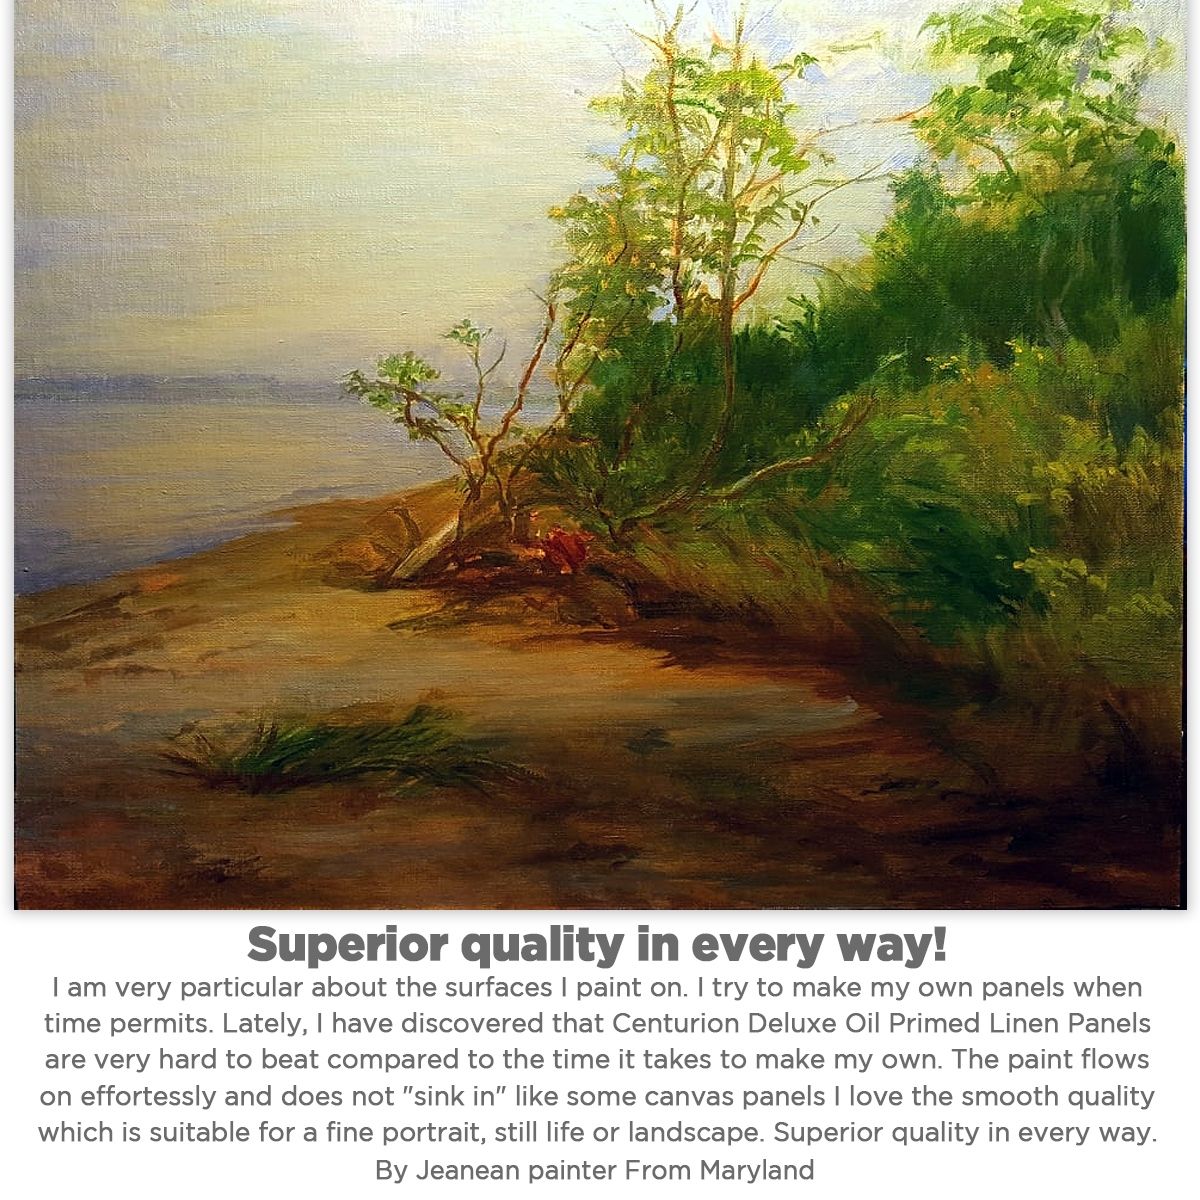 "Superior quality in everyway!" - Acid-free, Archival Linen Panel